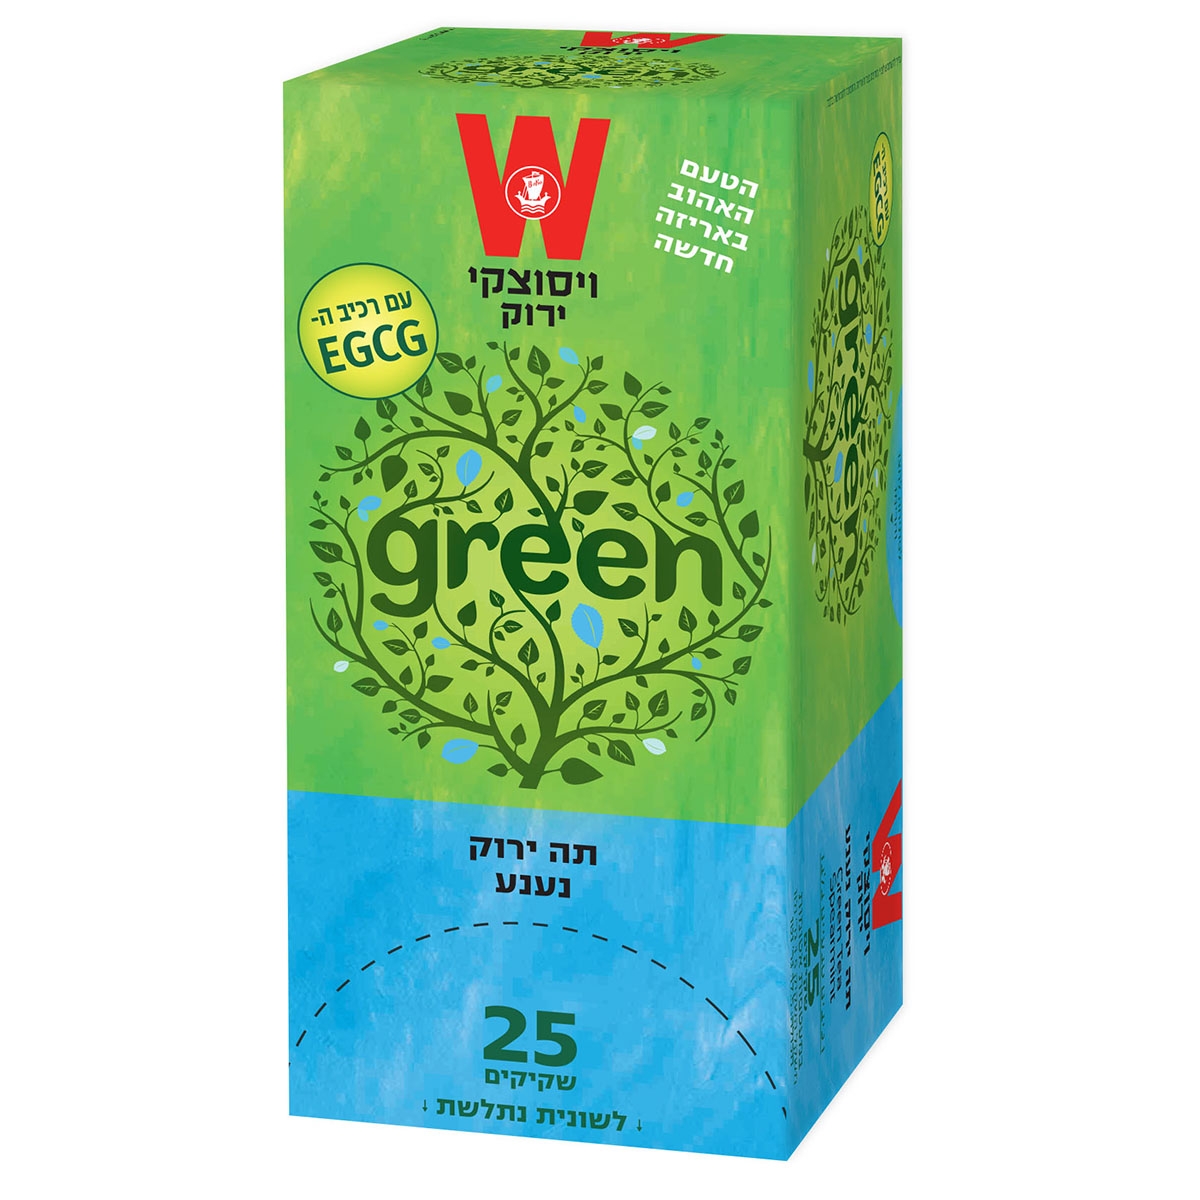  Wissotzky Green Tea with Spearmint Leaves - 1